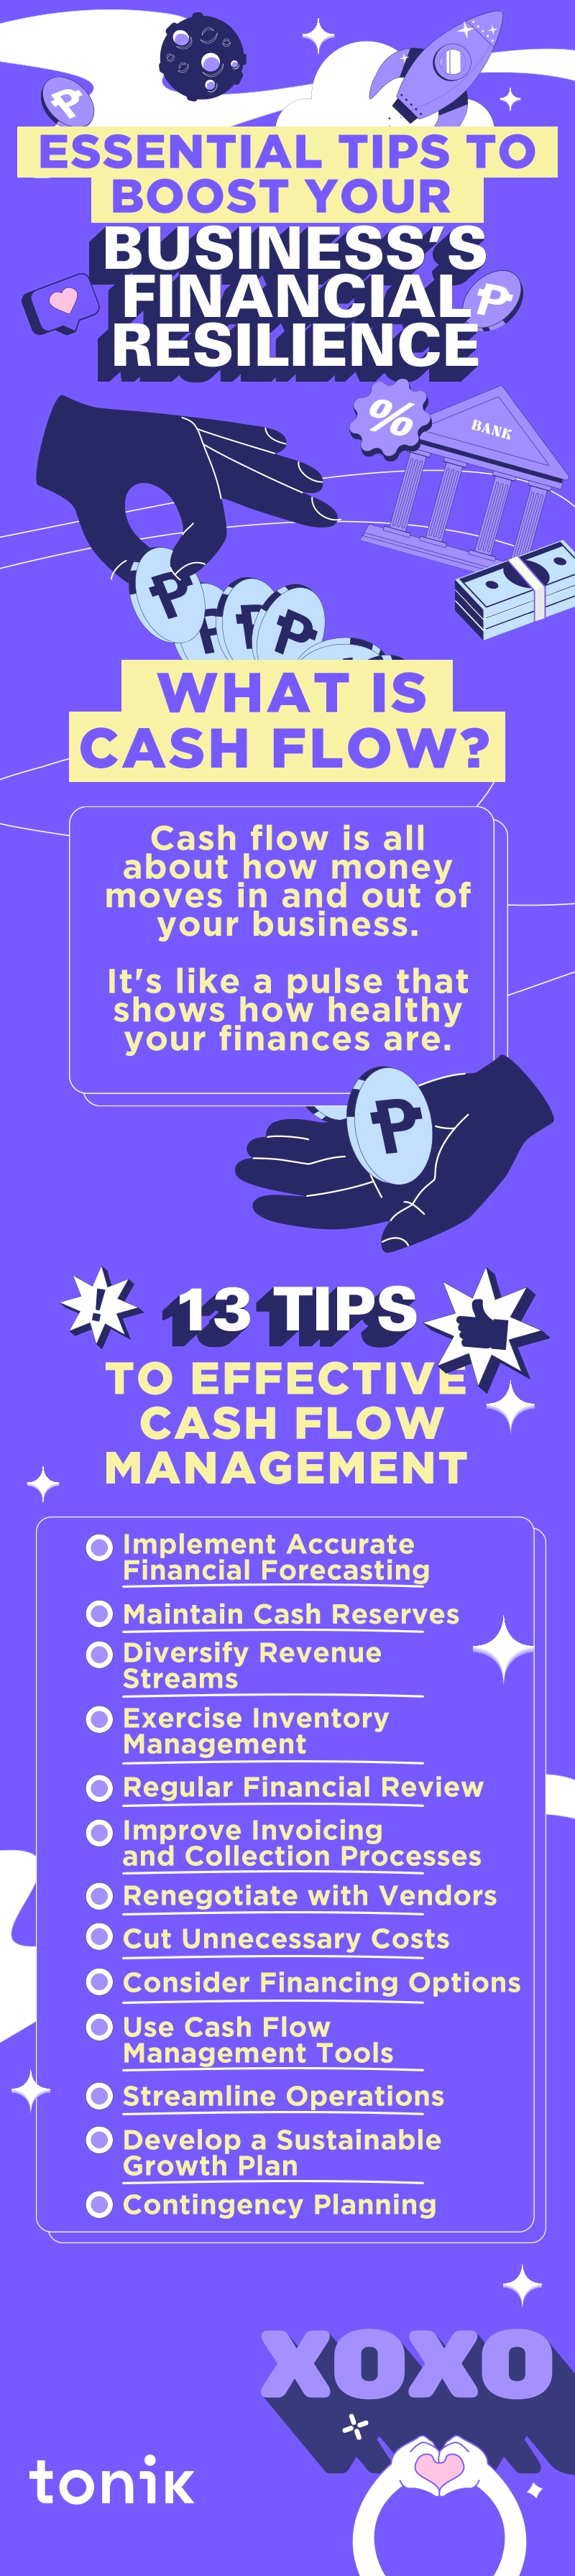 infographic that shares 13 tips on effective cash flow management